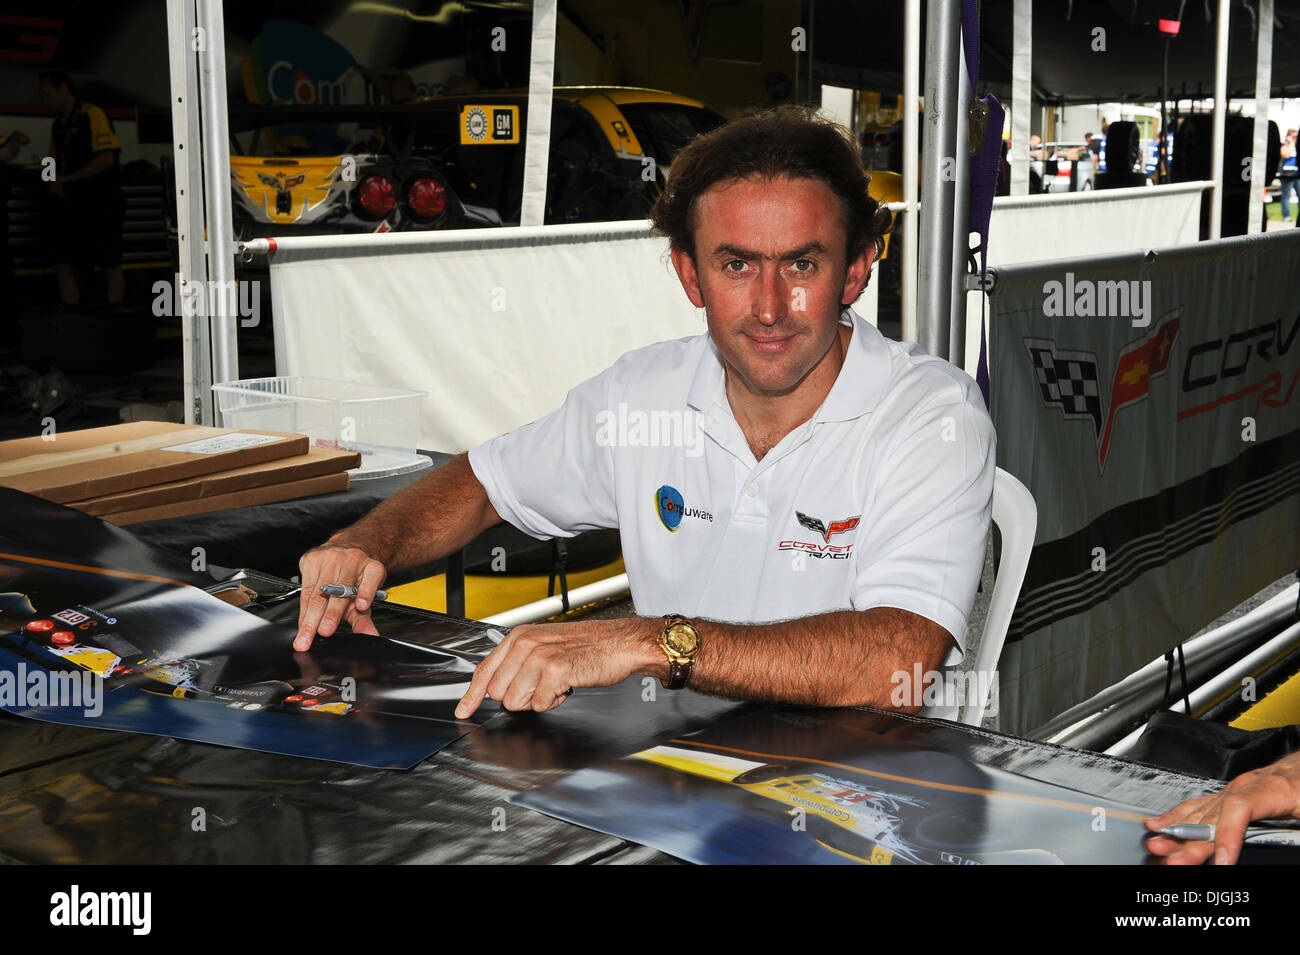 July 24, 2010 - Lakeville, Connecticut, United States of America - 24 July 2010: Olivier Beretta of Corvette Racing Team during the mandatory autograph session for ALMS drivers before the Northeast Grand Prix at Lime Rock Park Lakeville, Connecticut..Mandatory Credit: Geoff Bolte / Southcreek Global (Credit Image: © Southcreek Global/ZUMApress.com) Stock Photo